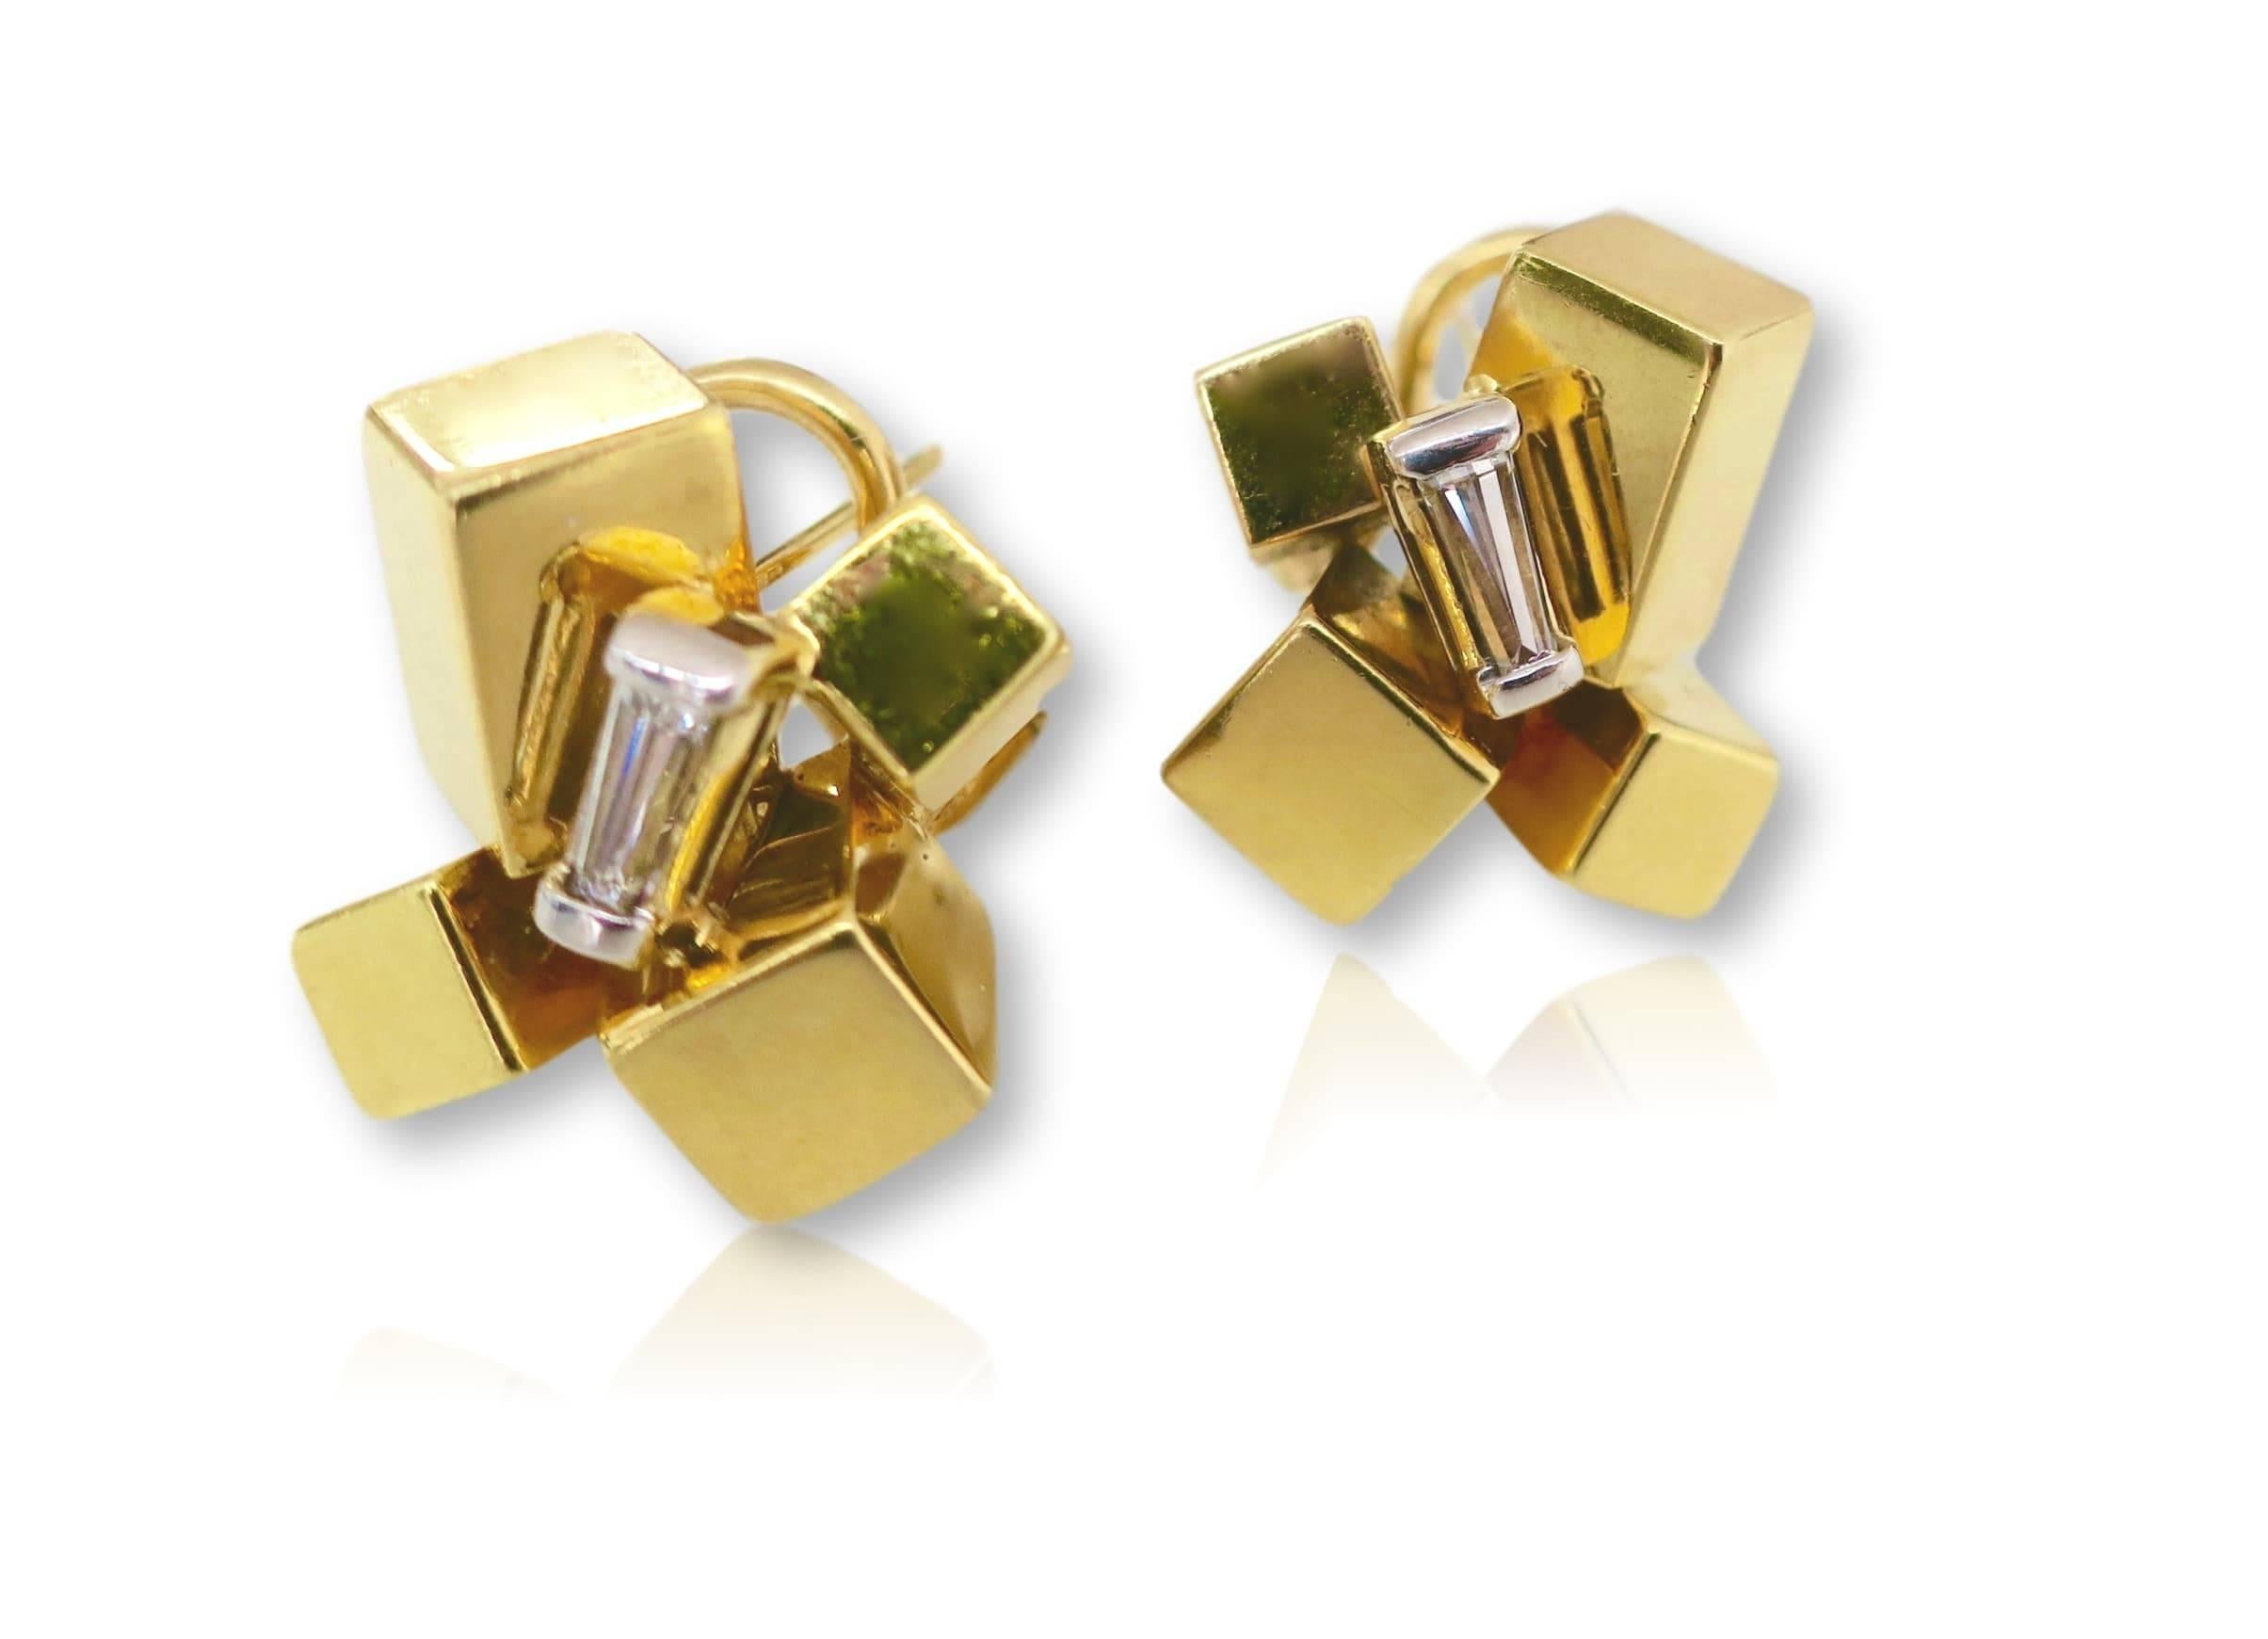 Cubist style earrings by New York Designer Alfred Karram. A pair of 3/4